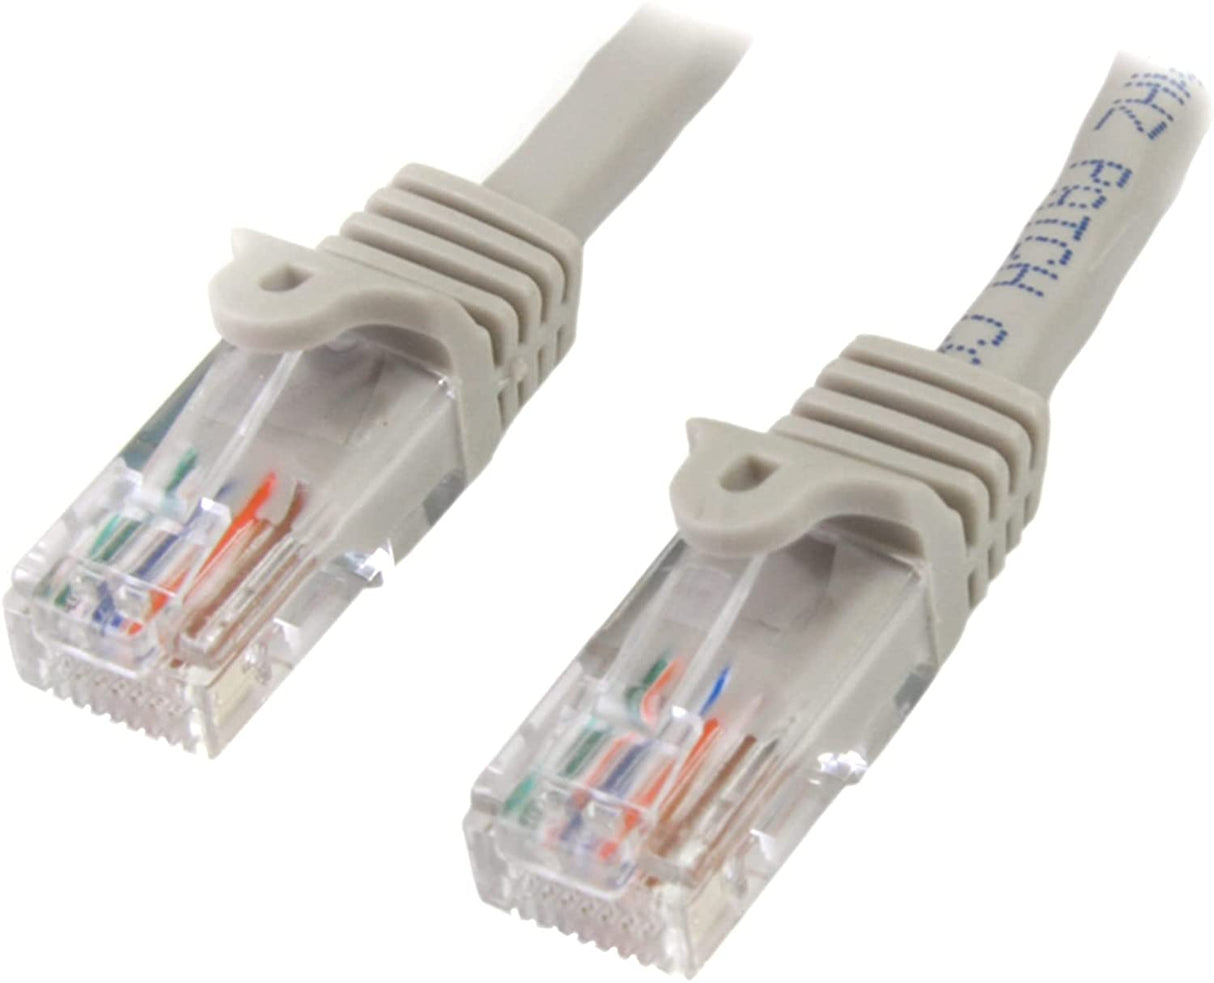 StarTech.com Cat5e Patch Cable with Snagless RJ45 Connectors - 50 ft, Gray (45PATCH50GR) 50 ft / 15m Grey